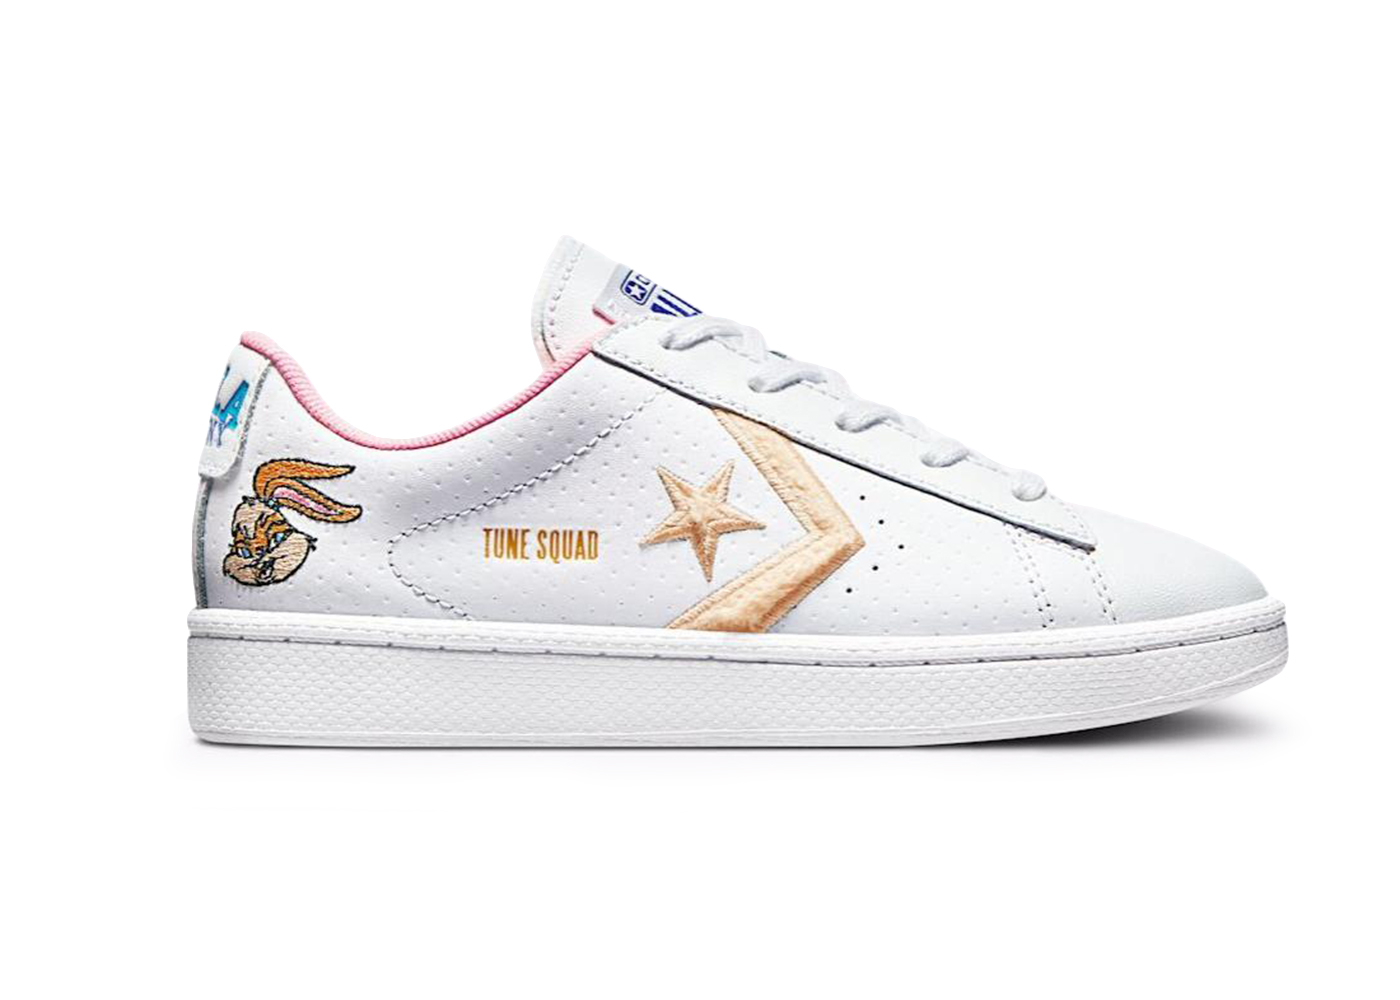 Converse Pro Leather Lola Bunny Space Jam (PS)